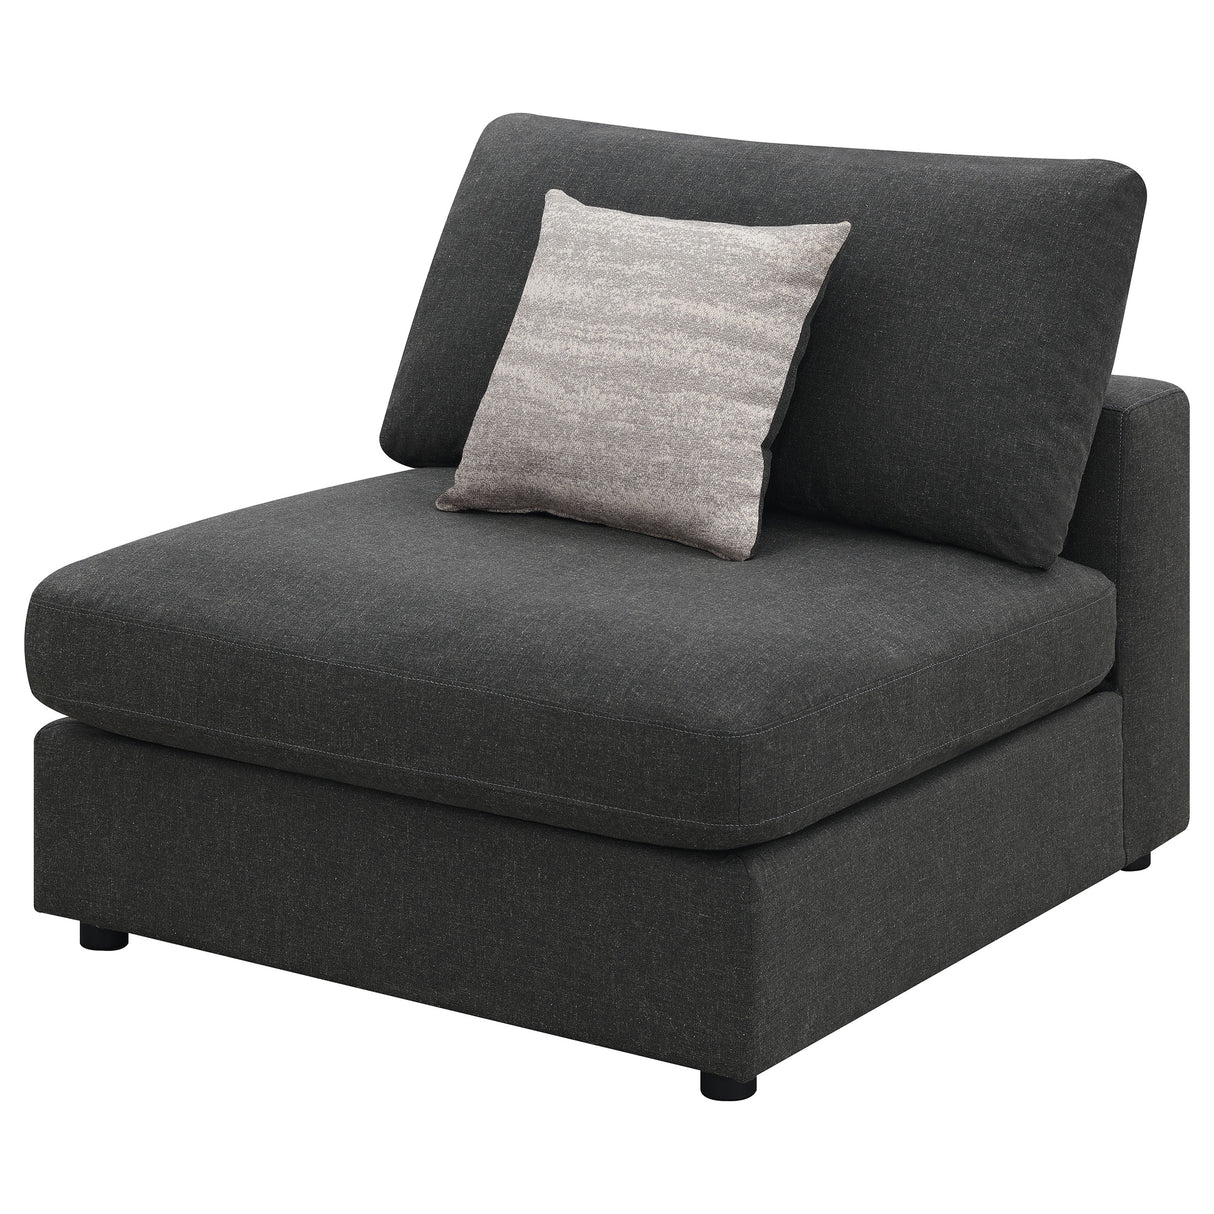 Armless Chair - Serene Upholstered Armless Chair Charcoal